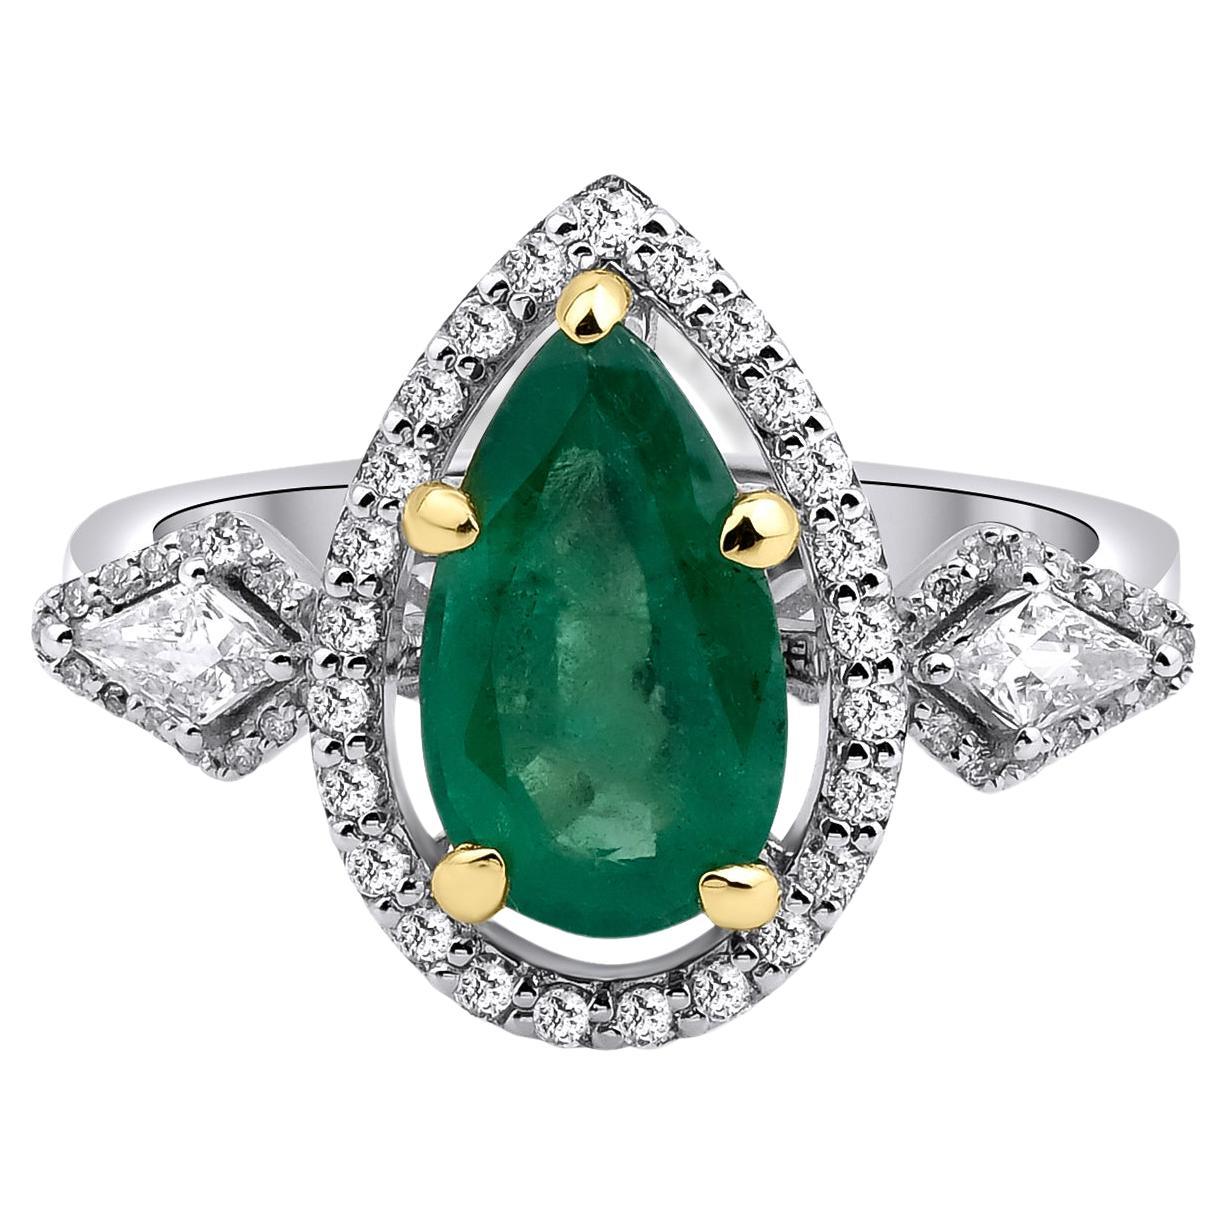 CERTIFIED 1.80CT Pear Cut Emerald And 0.48CT Diamond Tria Ring Solid 18kt Gold For Sale